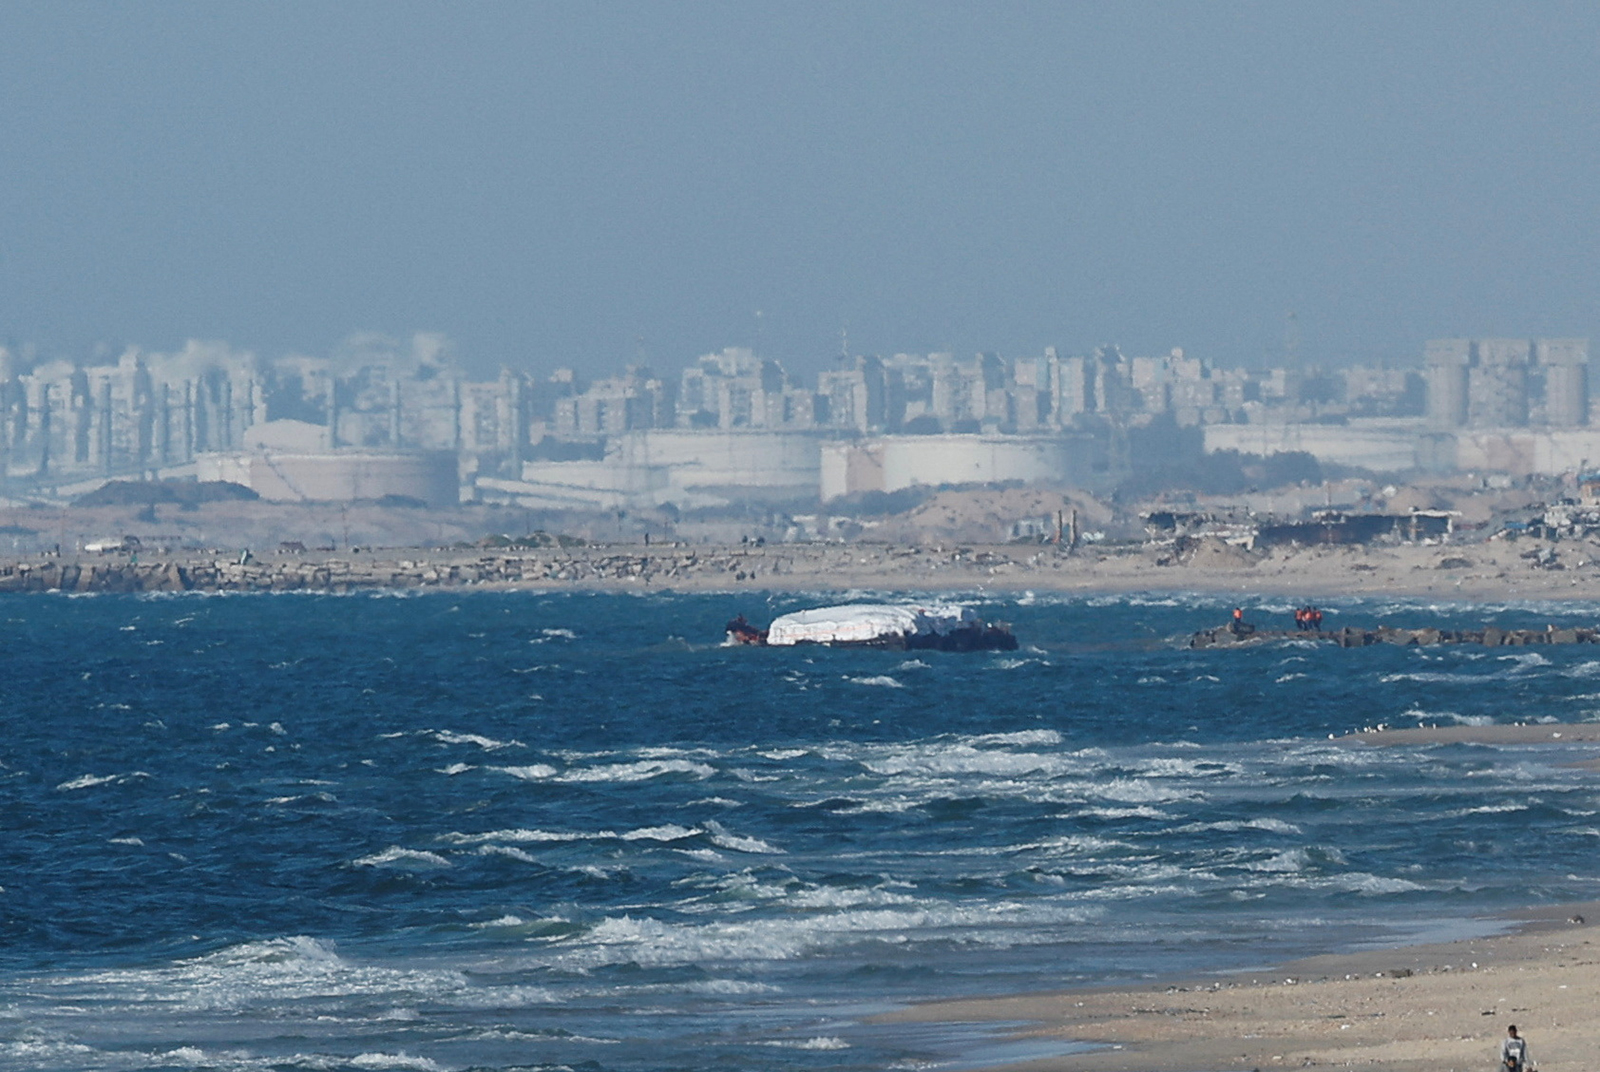 Aid delivered by the Open Arms vessel arrives off the coast of Gaza, amid the ongoing conflict between Israel and the Palestinian Islamist group Hamas, as seen from central Gaza Strip on March 15.